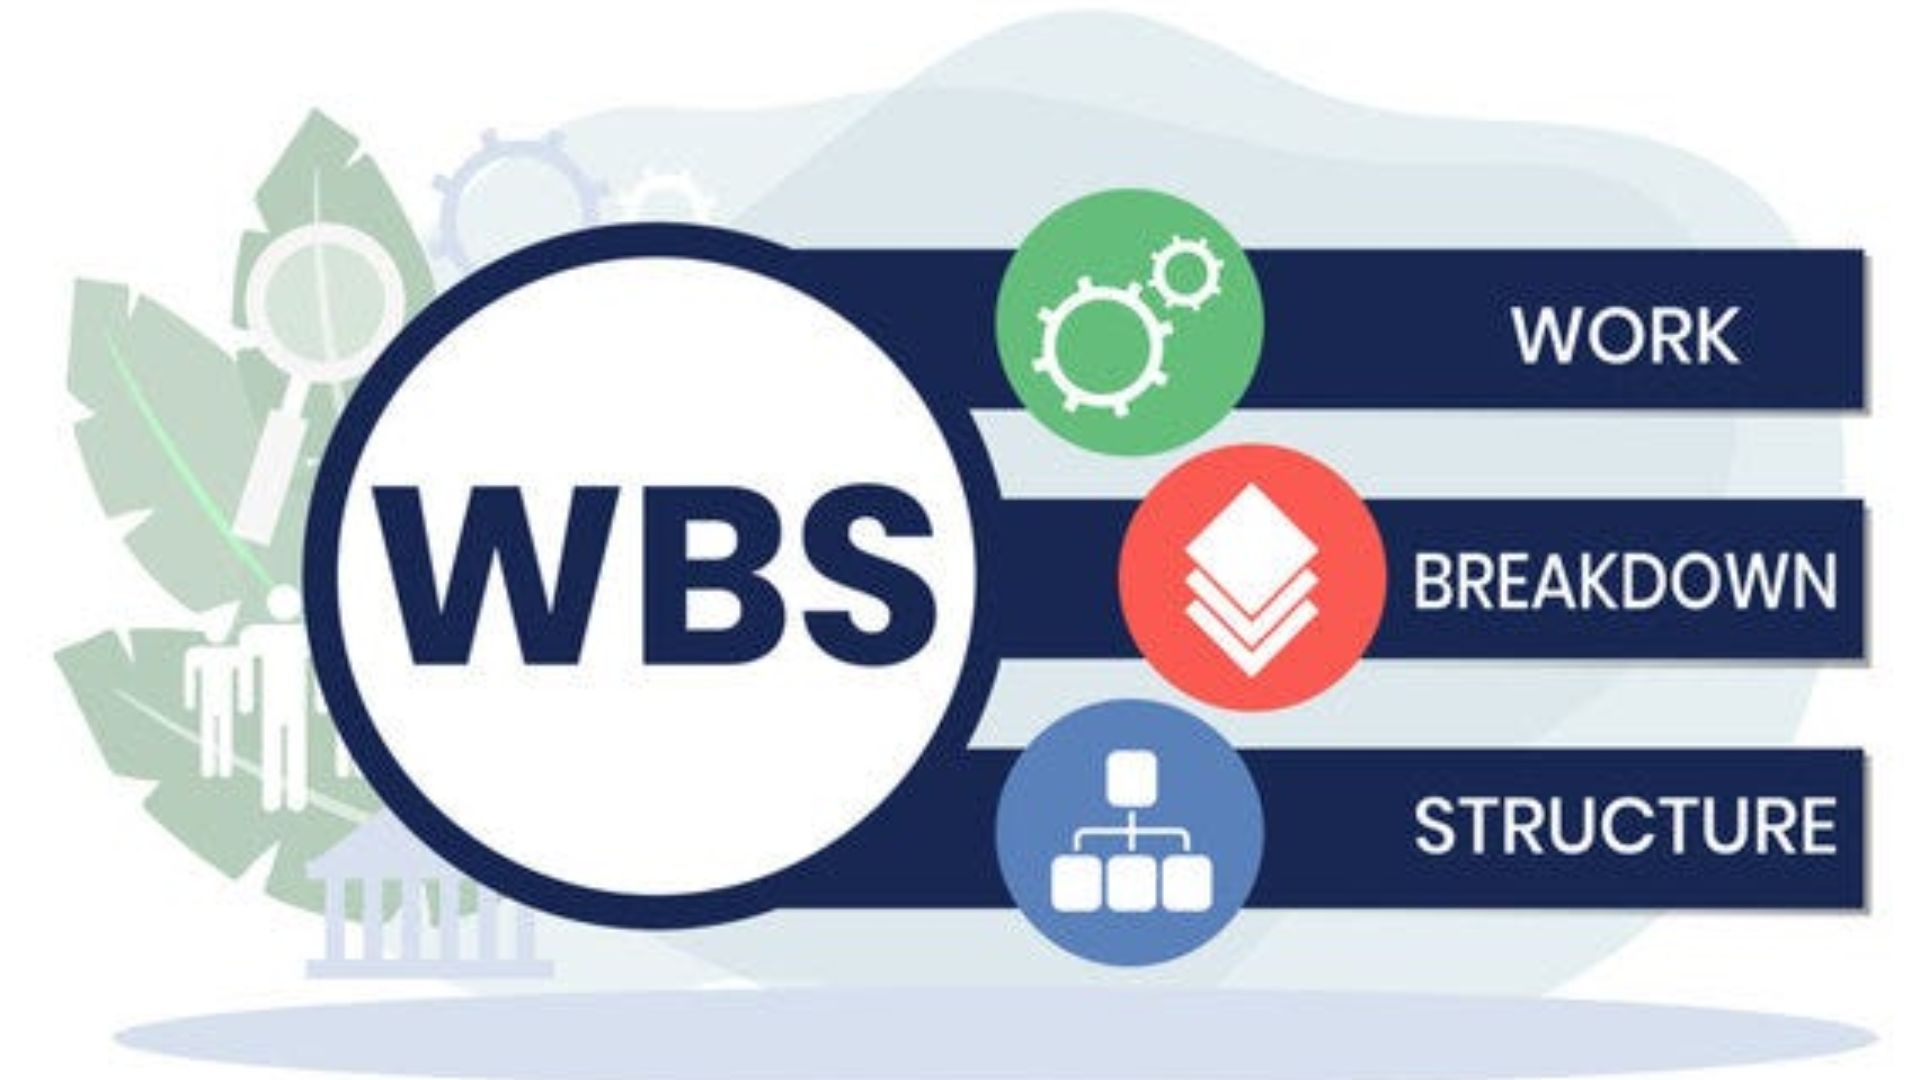 Real-World Applications of the WBS Dictionary